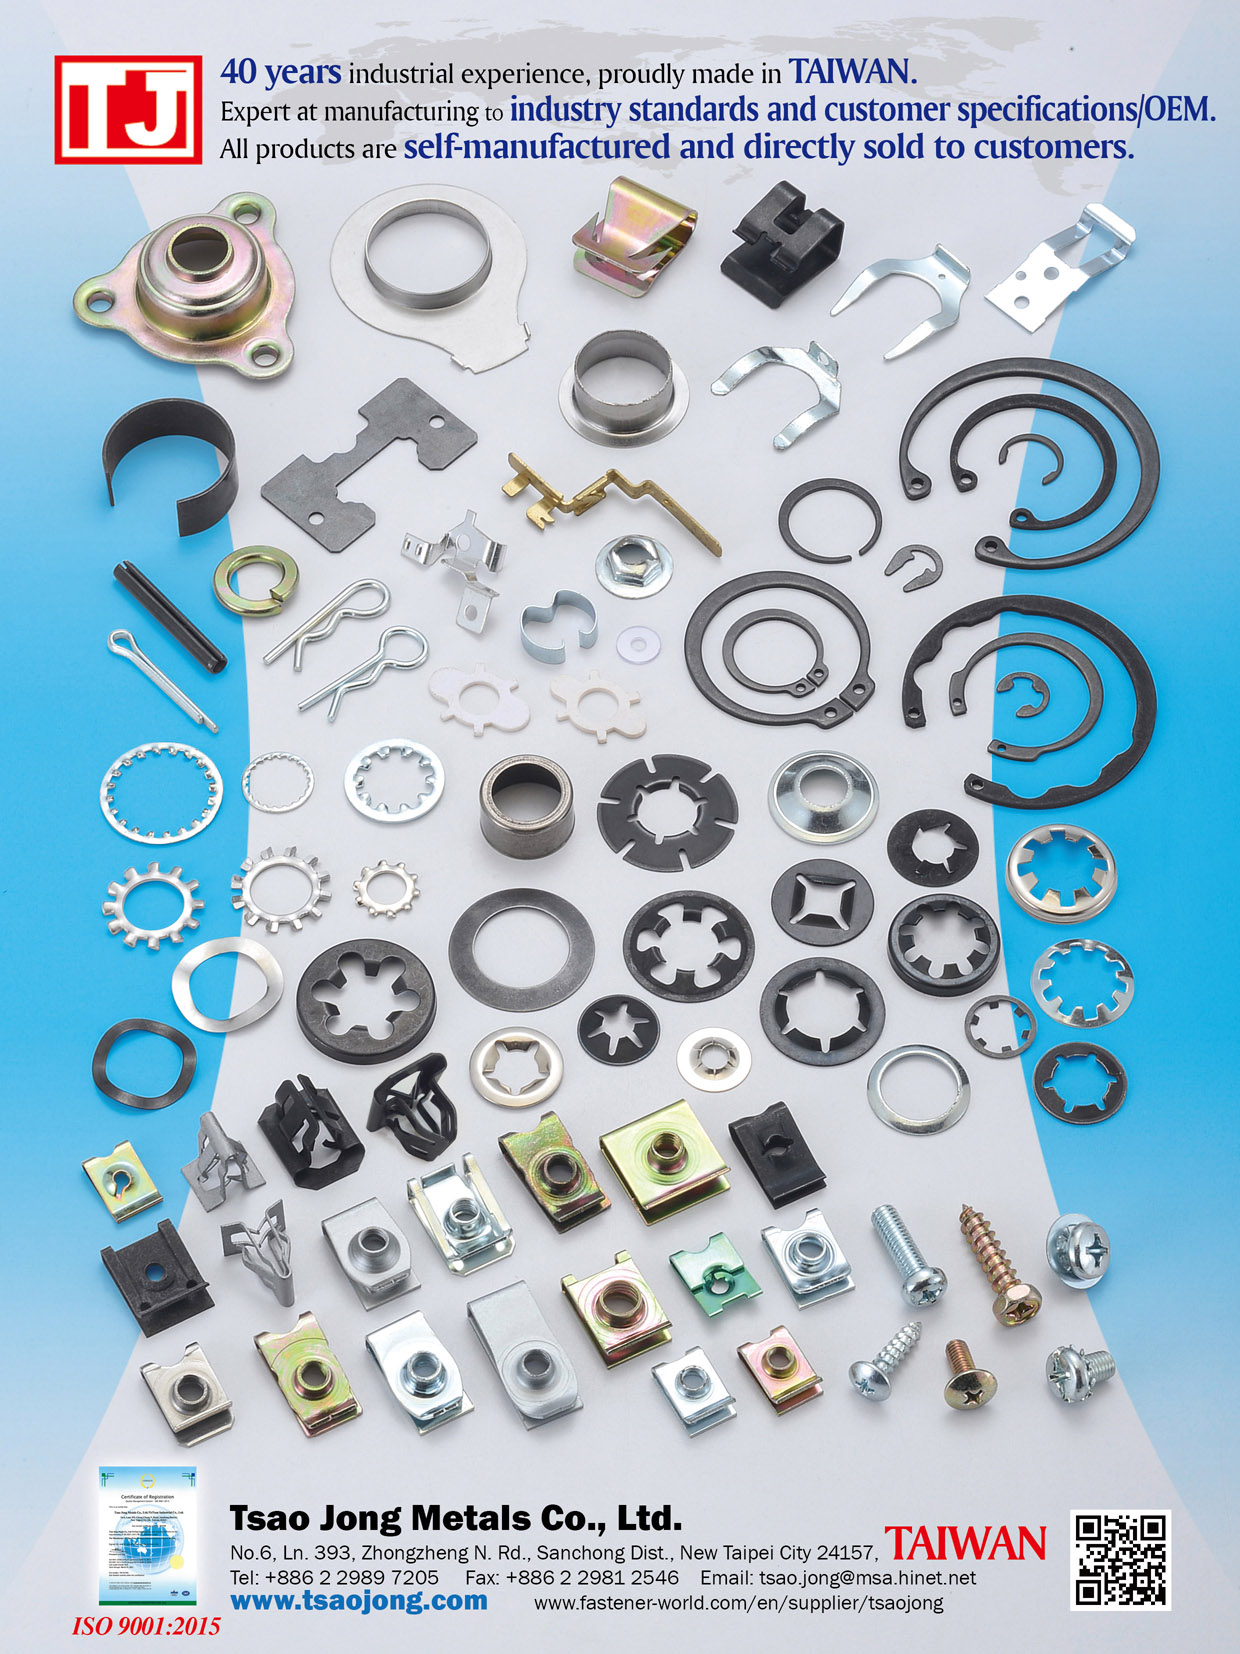 TSAO JONG METALS CO., LTD. , Locknuts and Pushnut, Self-threading Nuts, Bolt Retainers, Coiled Pins, Plate Nut, Toothed Lock Washer Internal , Custom Washers